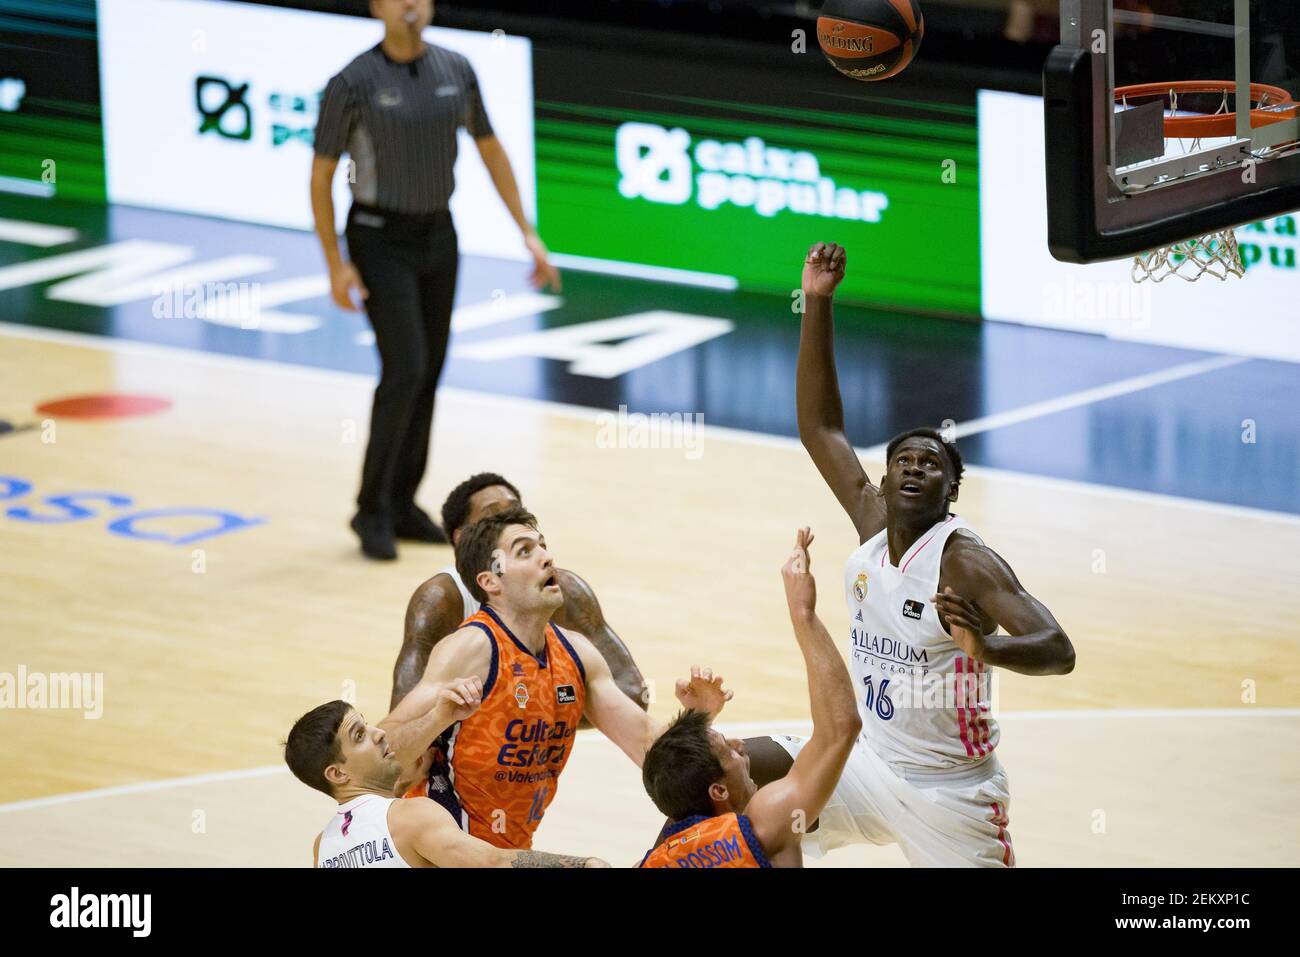 Usman Garuba of Real Madrid and Mike Tobey of Valencia in action during the  Spanish basketball league (Liga Endesa) match between Valencia Basket and  Real Madrid at the Fuente San Luis Pavilion